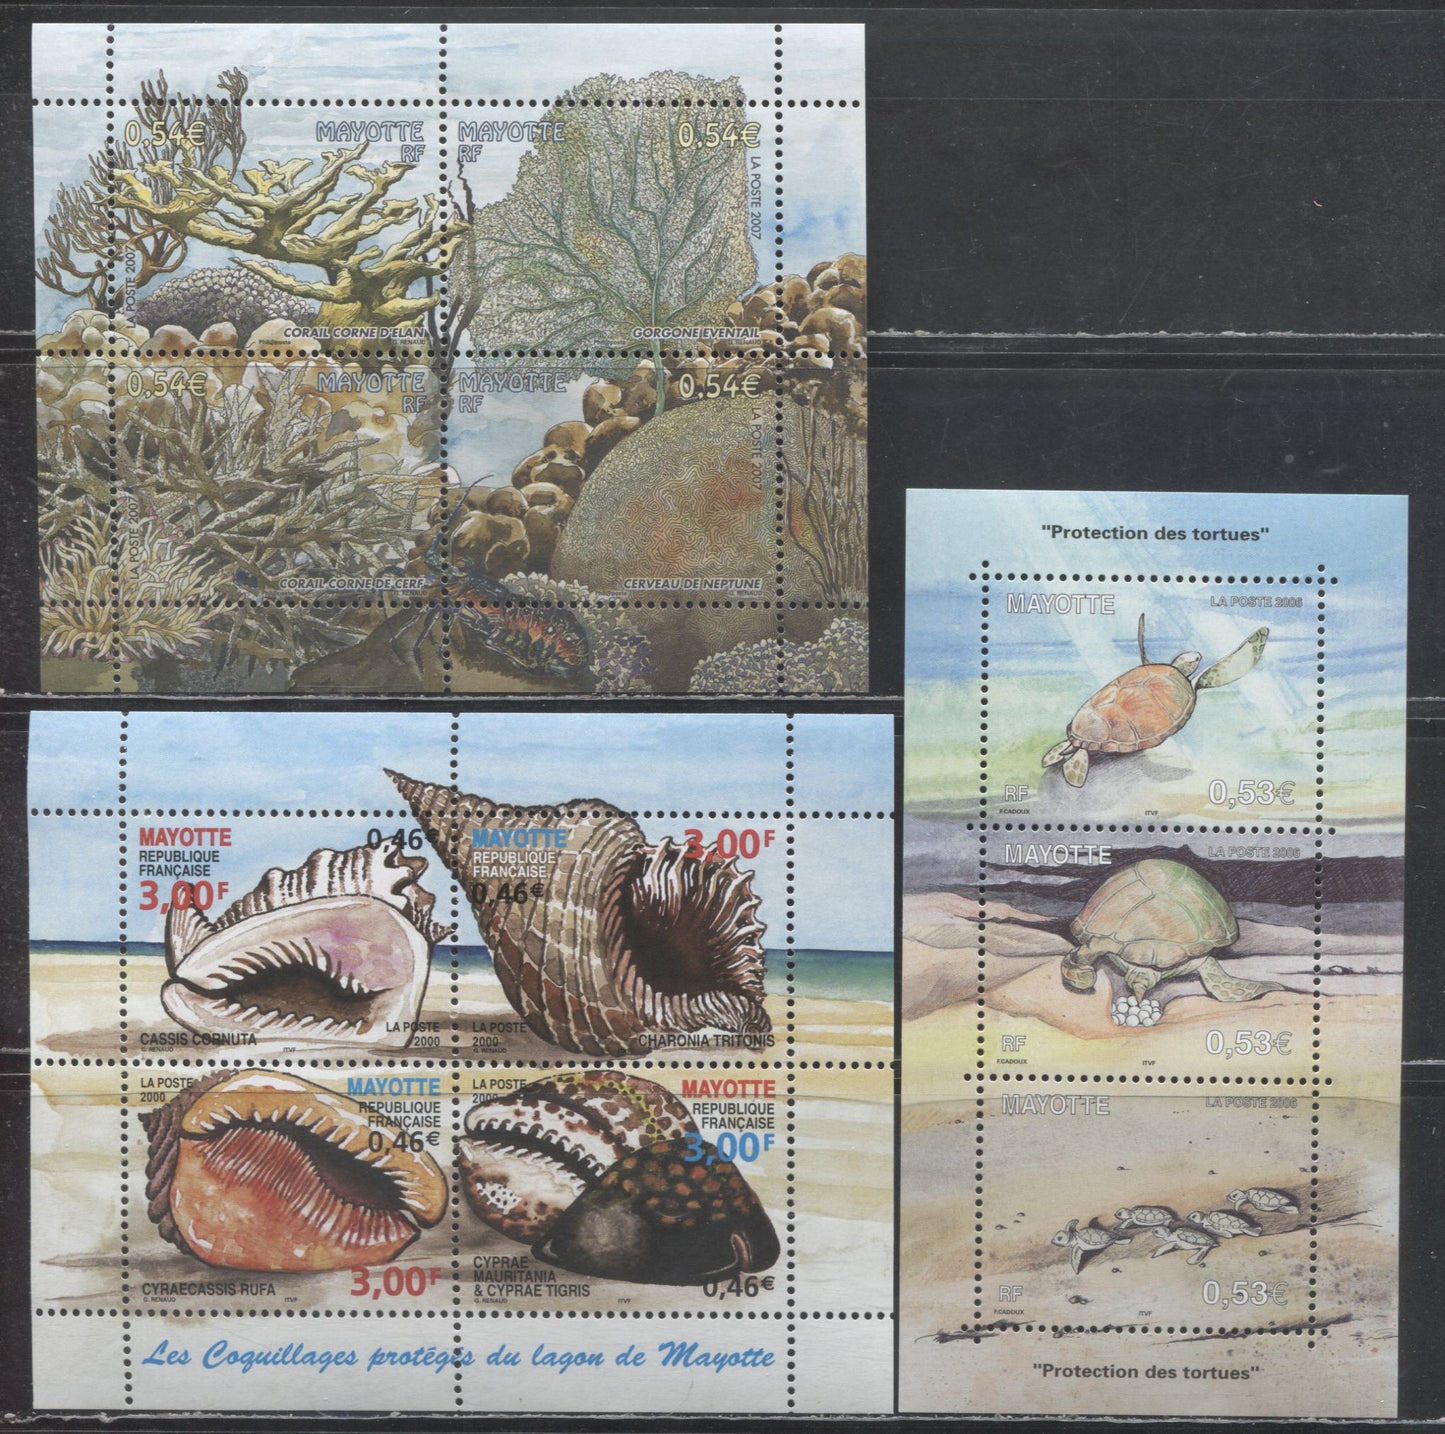 Lot 175 Mayotte (Comoro Islands) SC#140/223 2000-2006 Shells - Turtle Protection Issues, 3 VFNH Souvenir Sheets, Click on Listing to See ALL Pictures, 2017 Scott Cat. $24.5